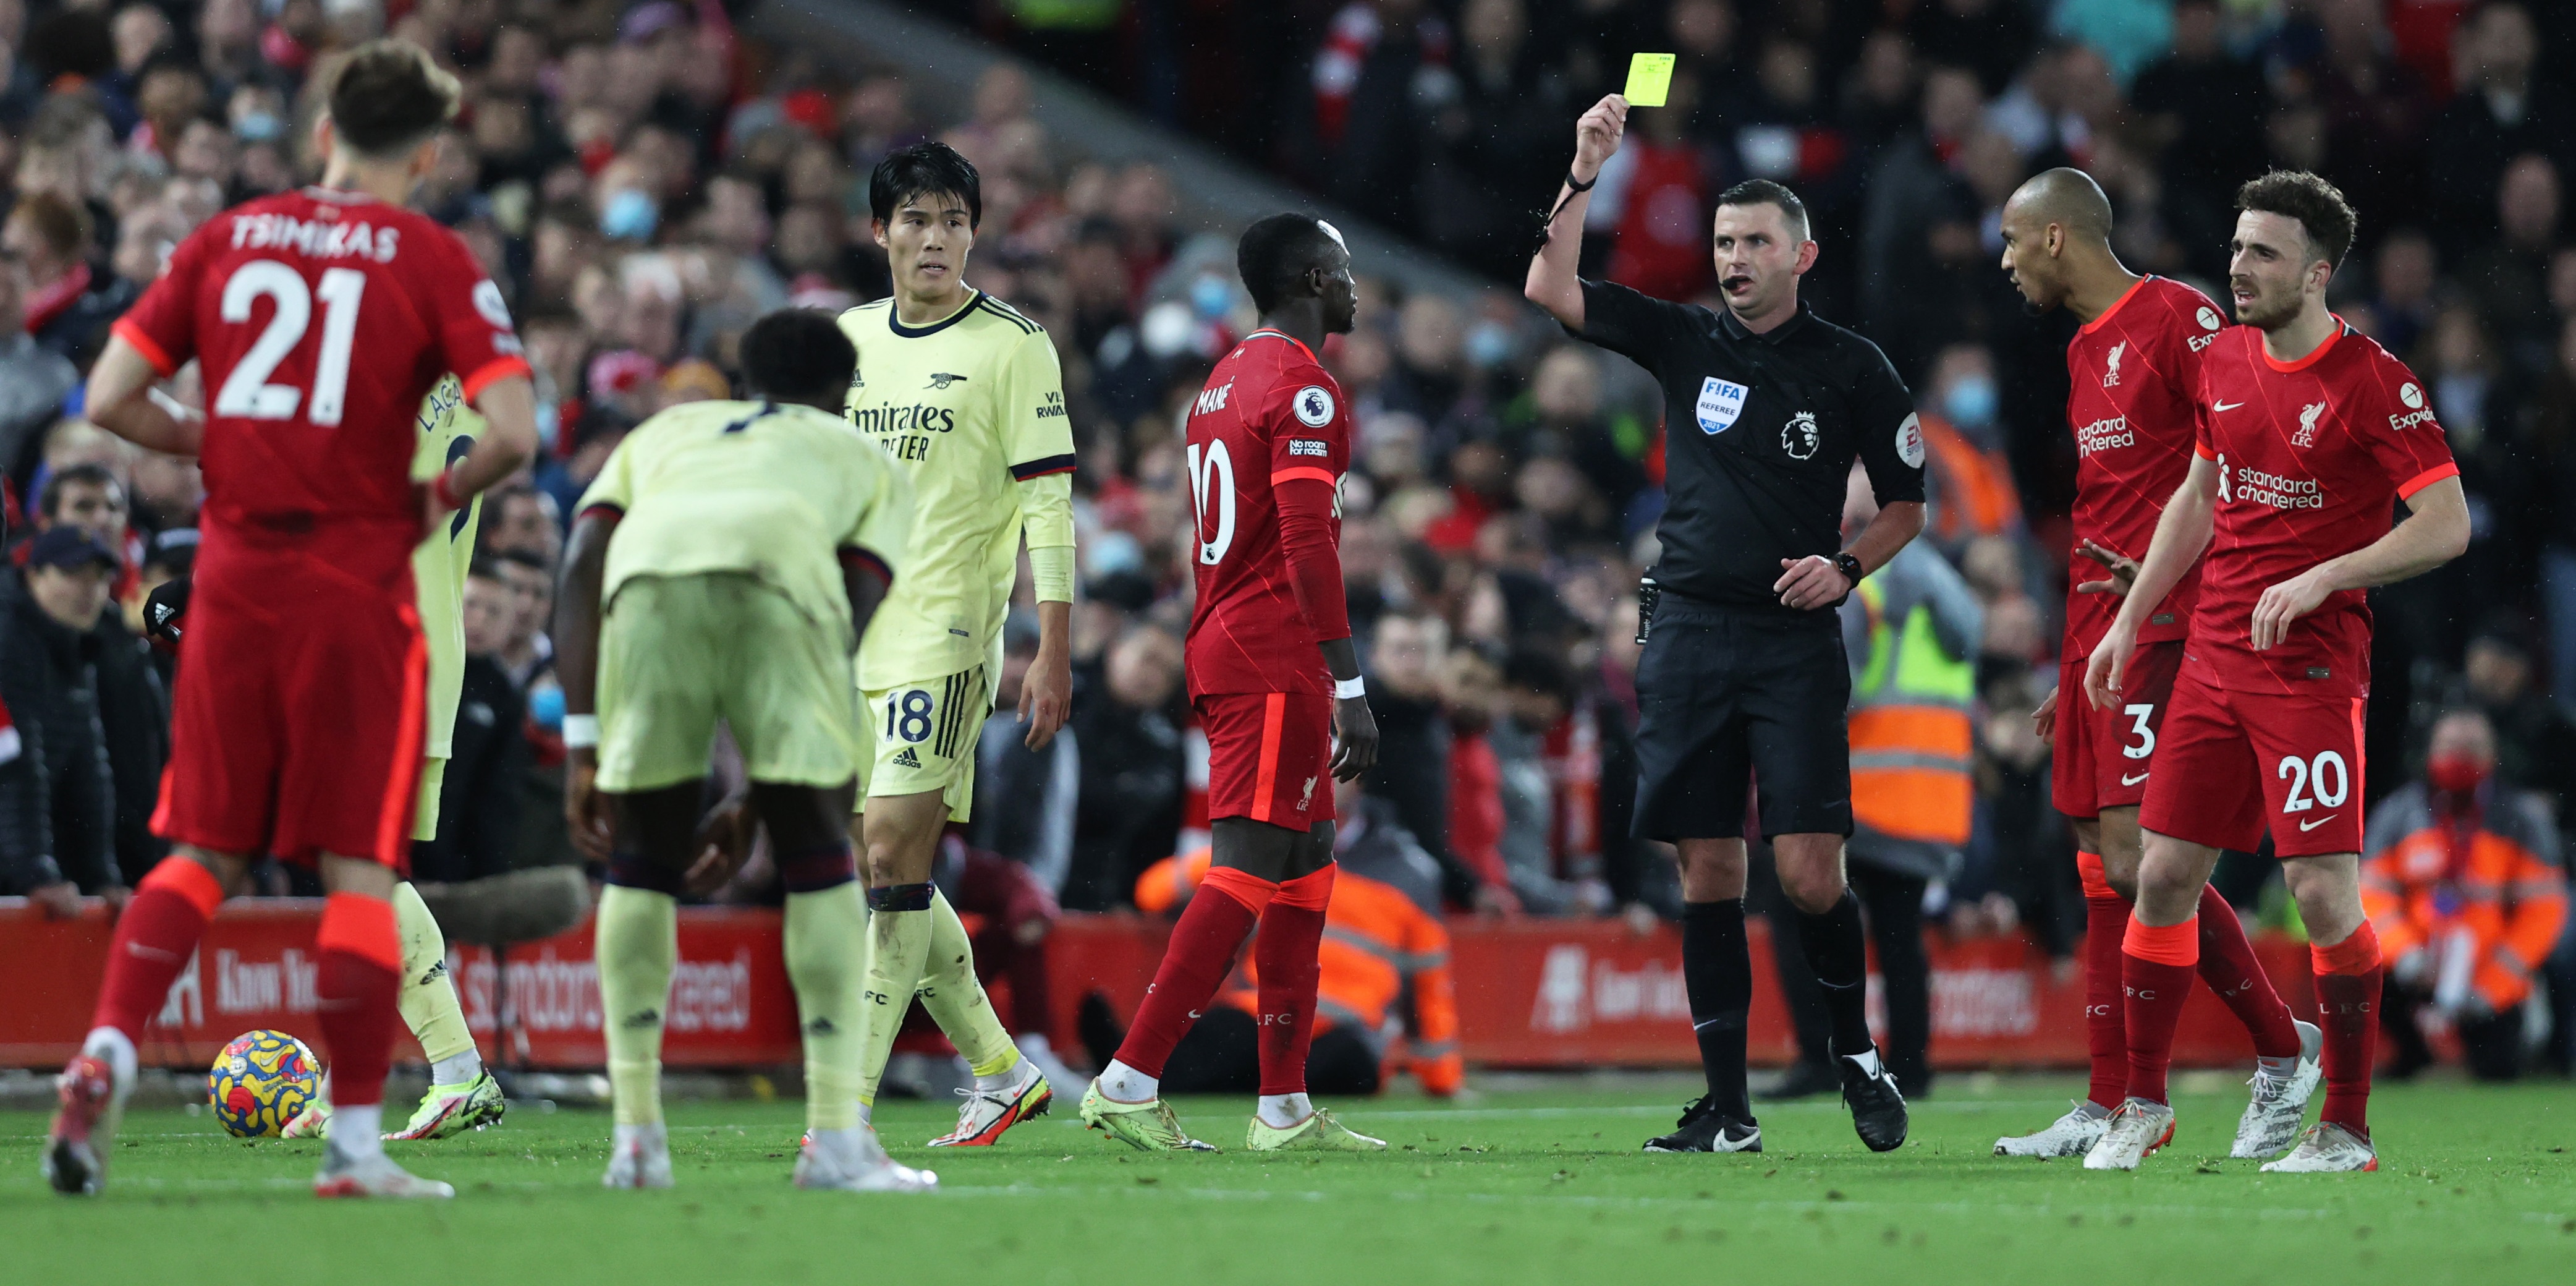 Ex-refereeing chief backs Michael Oliver over Liverpool call that sparked Arteta meltdown